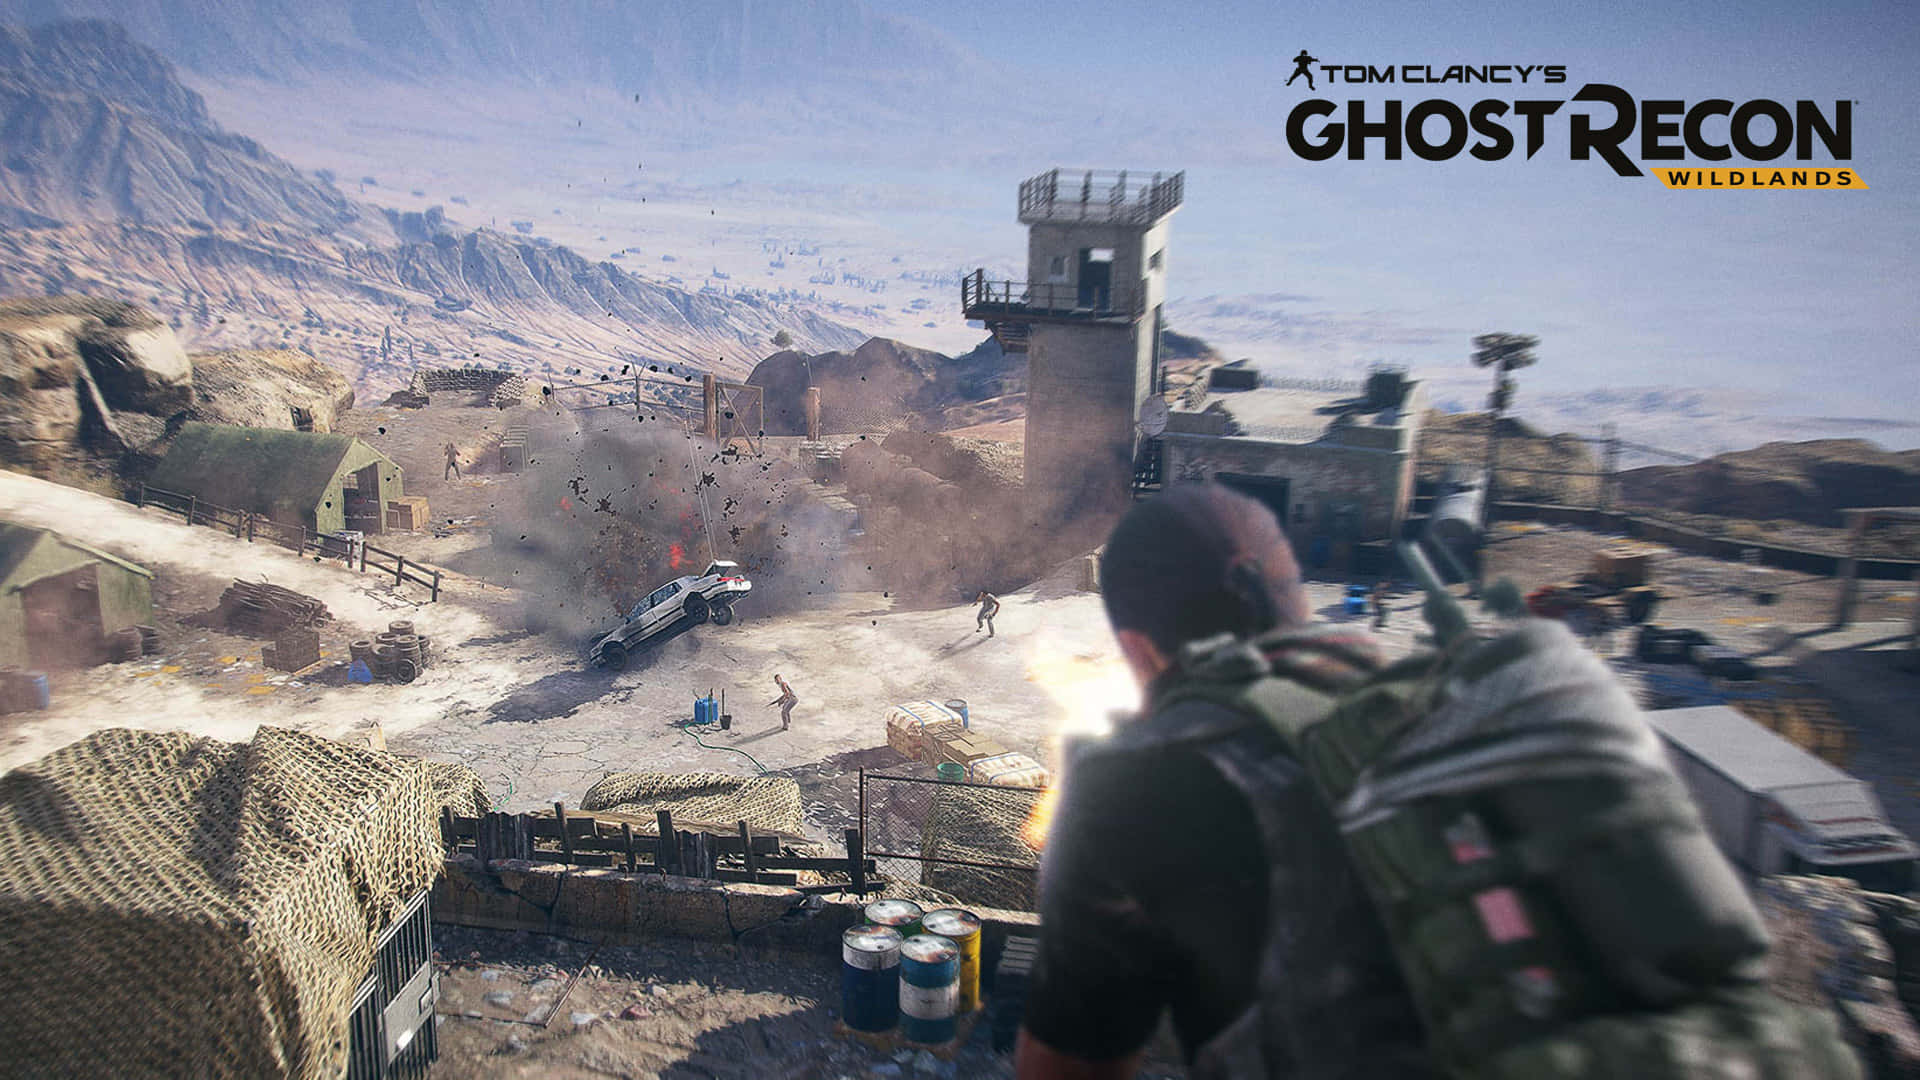 Dramatic Gaming Action in Ghost Recon Wildlands